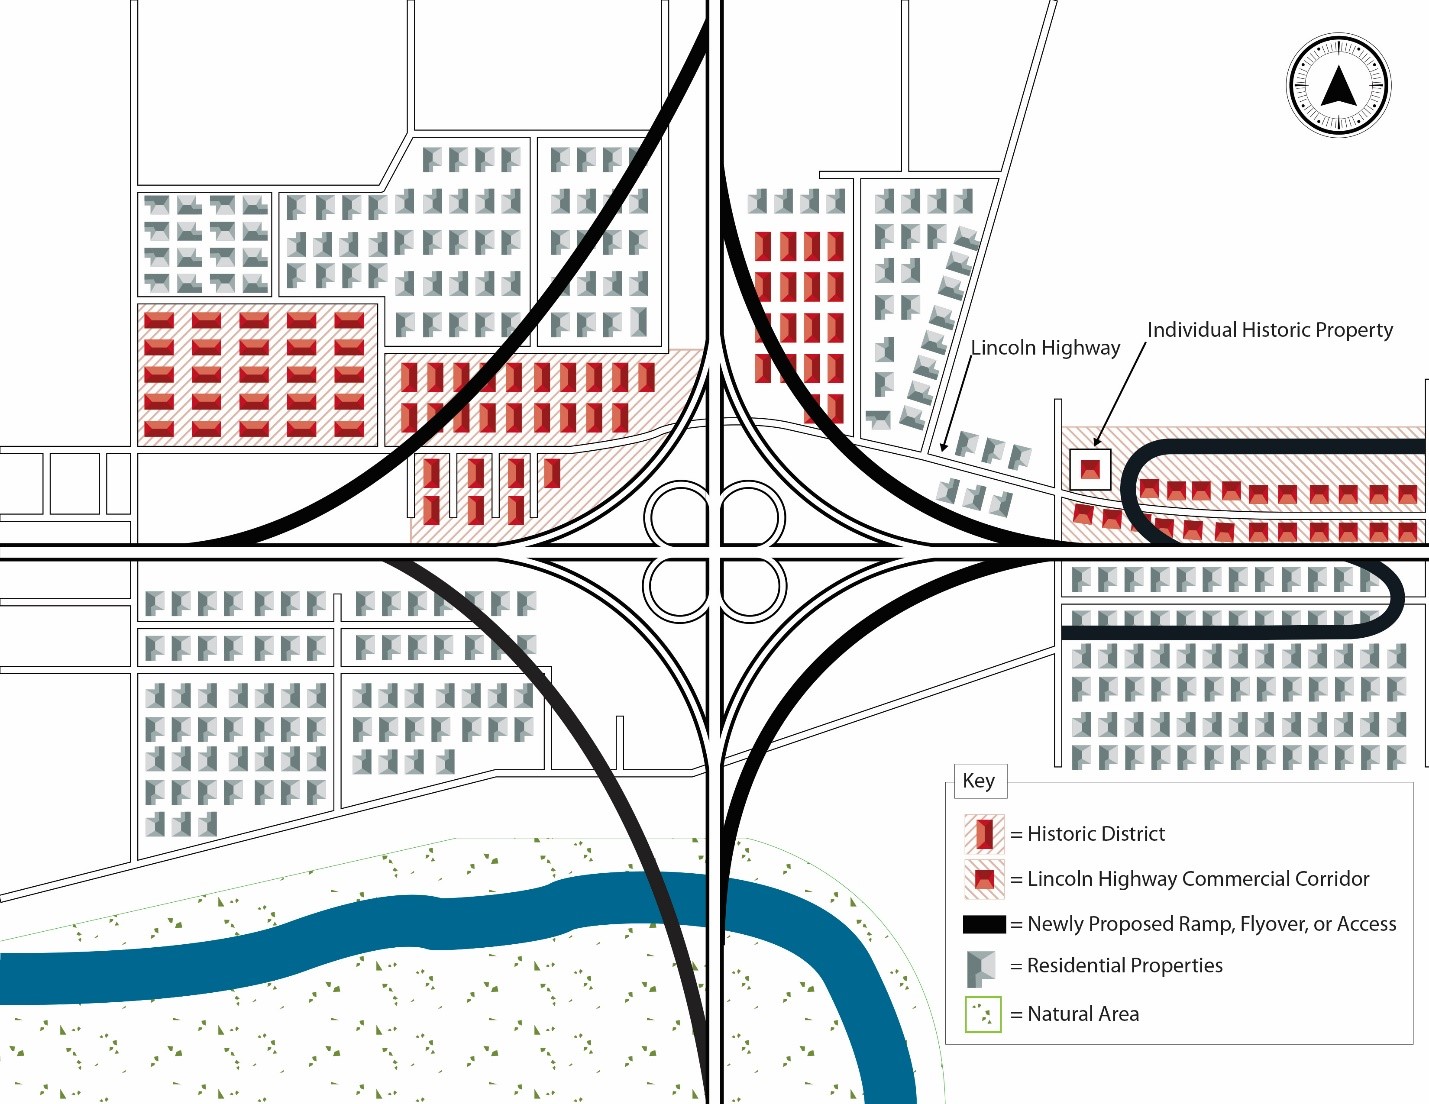 An illustration of a bird’s eye view of histroic properties at the interchange of the proposed project.